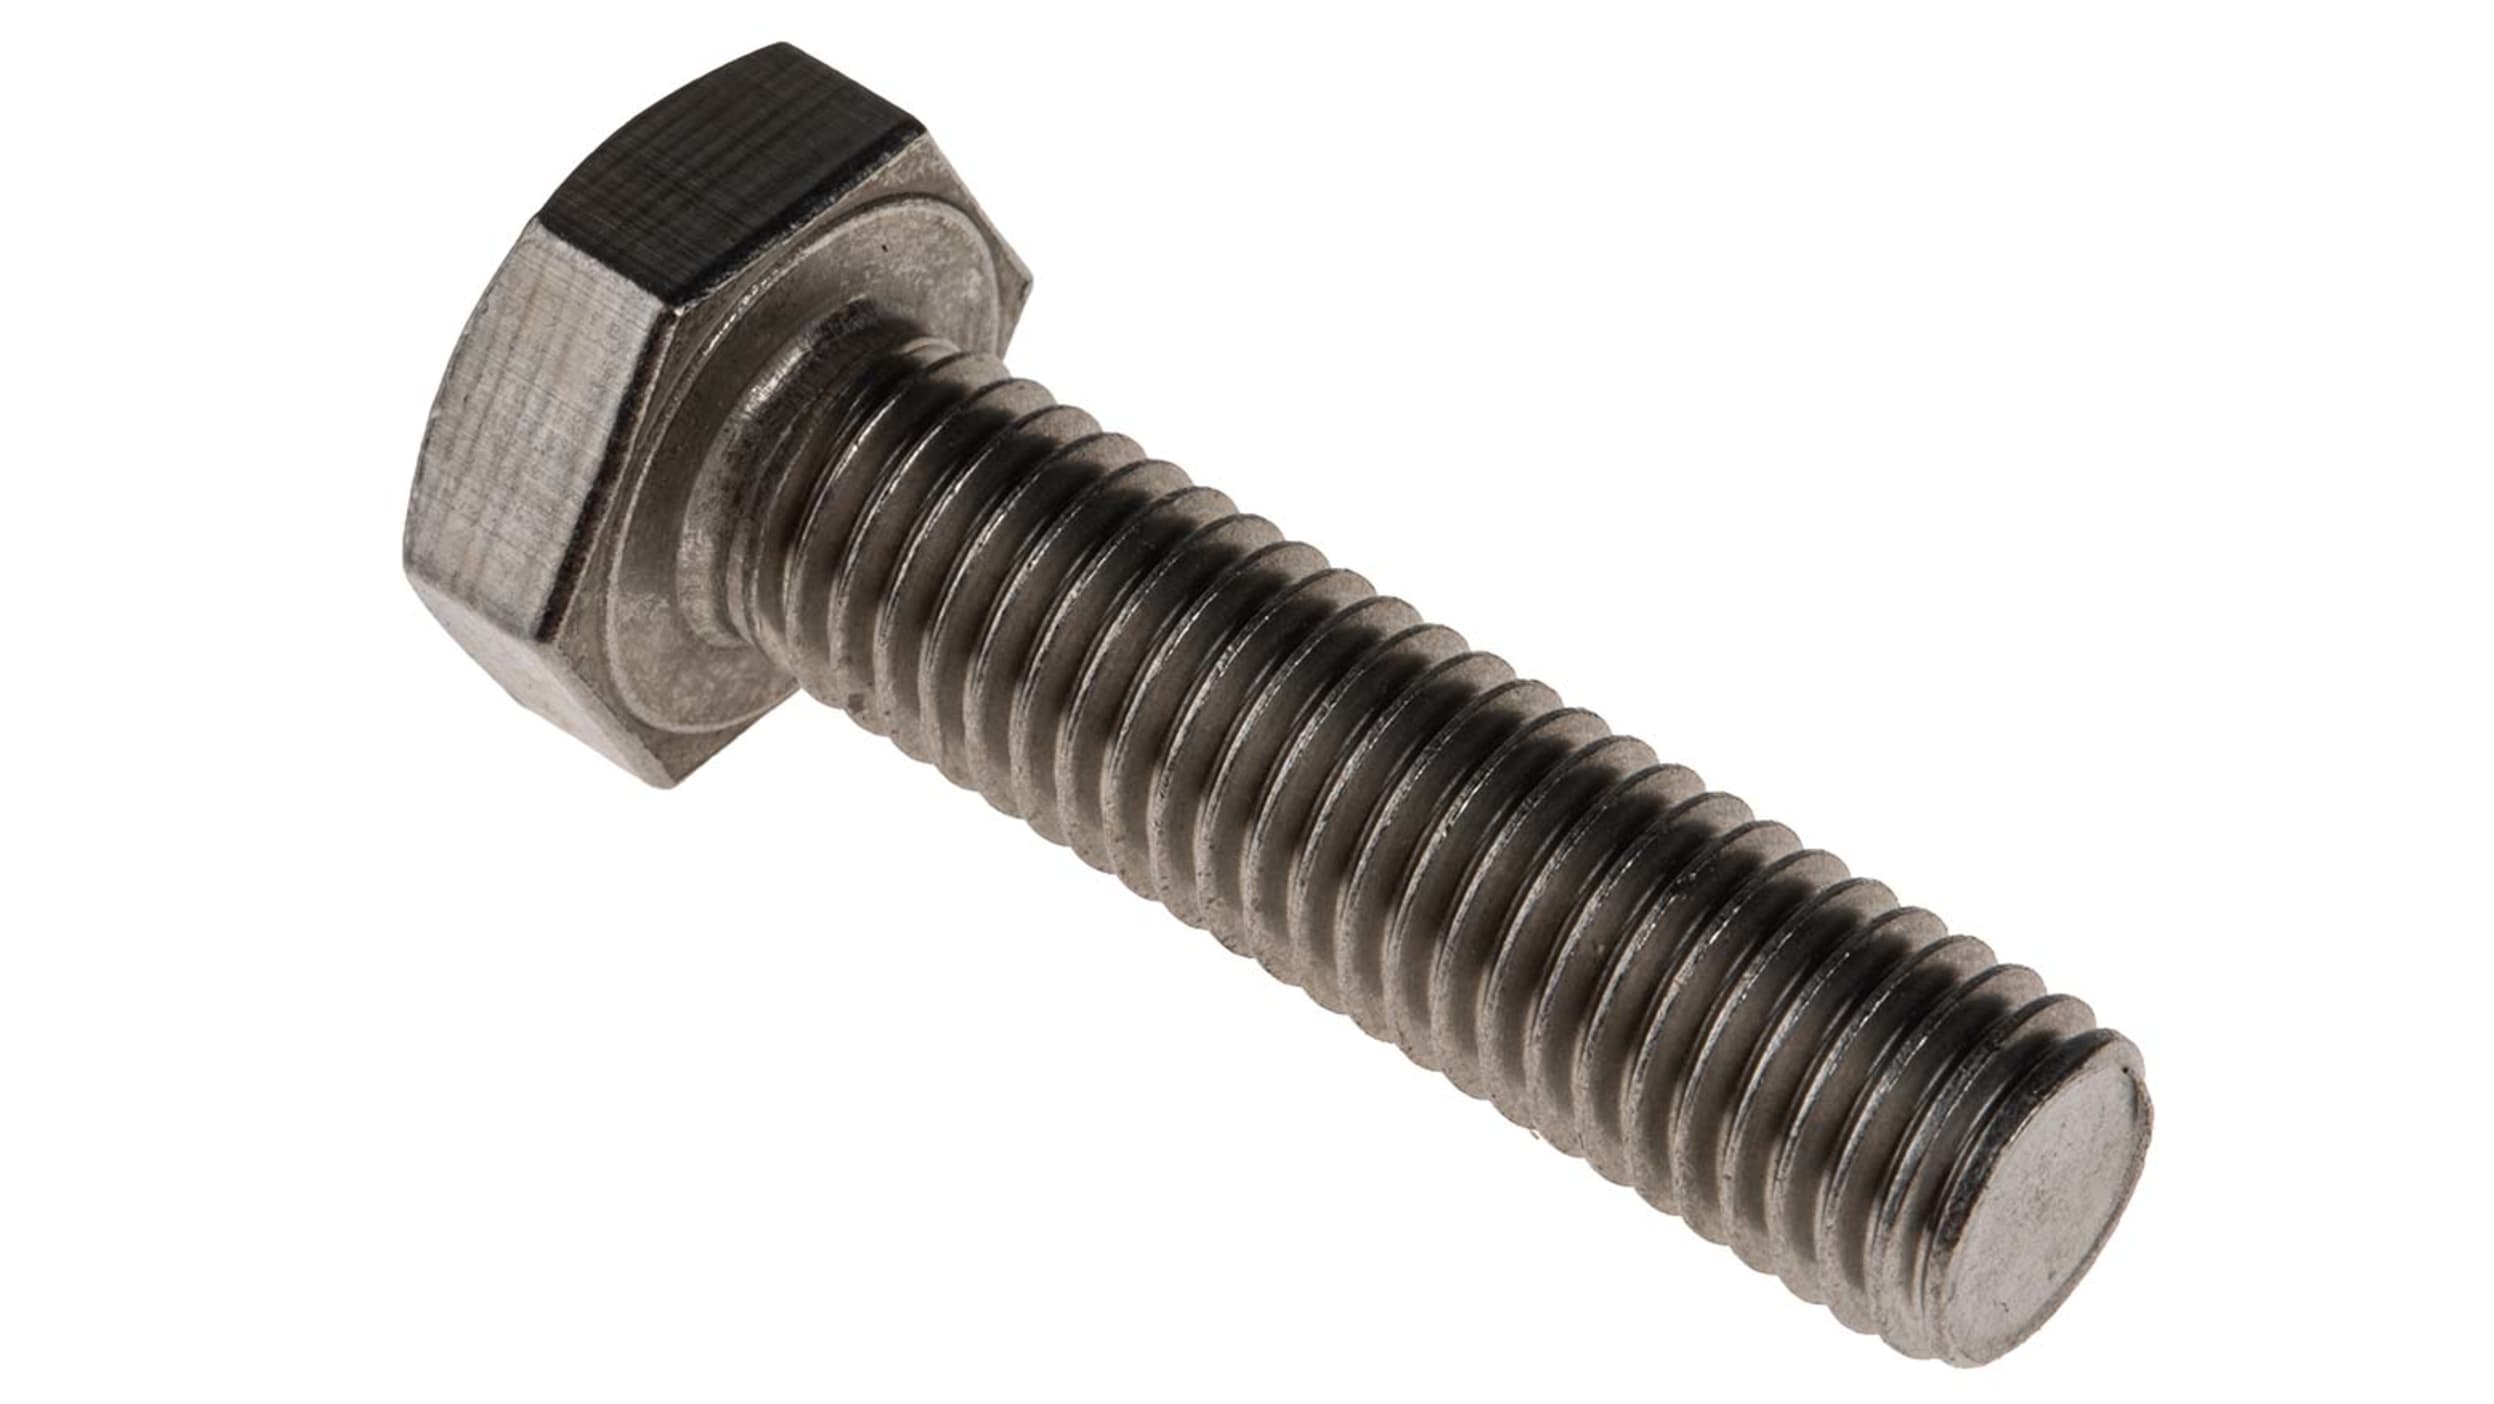 Plain Stainless Steel Hex, Hex Bolt, M10 x 40mm RS